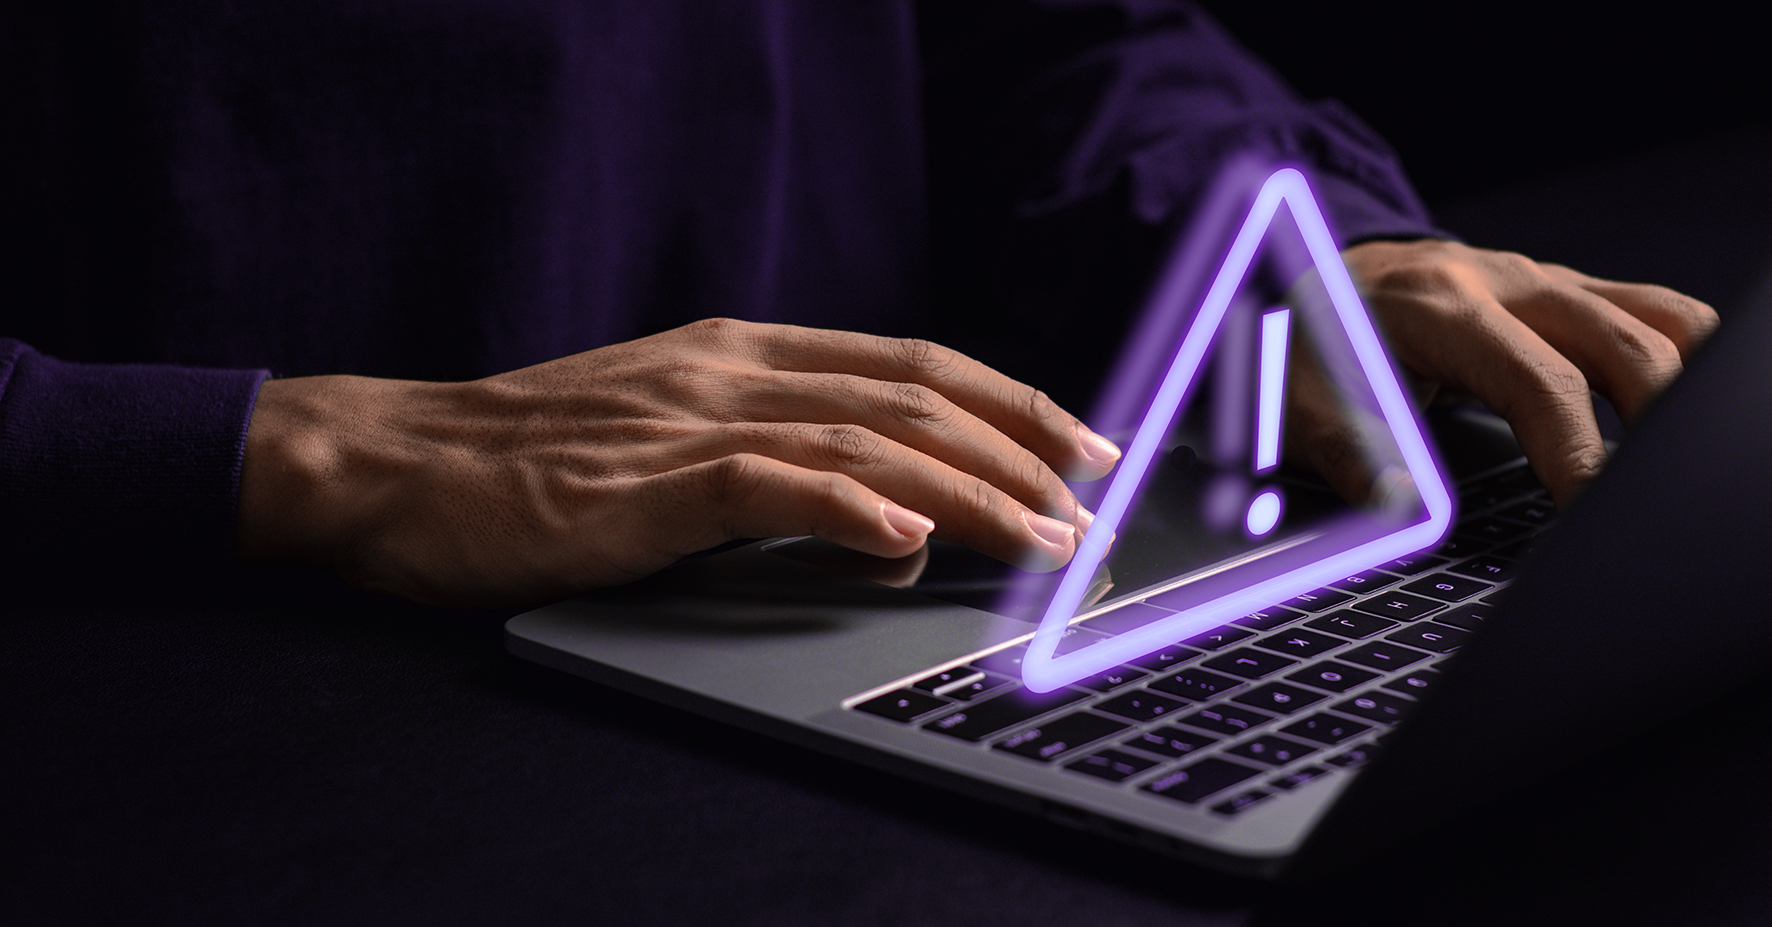 Fingers typing on laptop, 3D purple neon warning sign